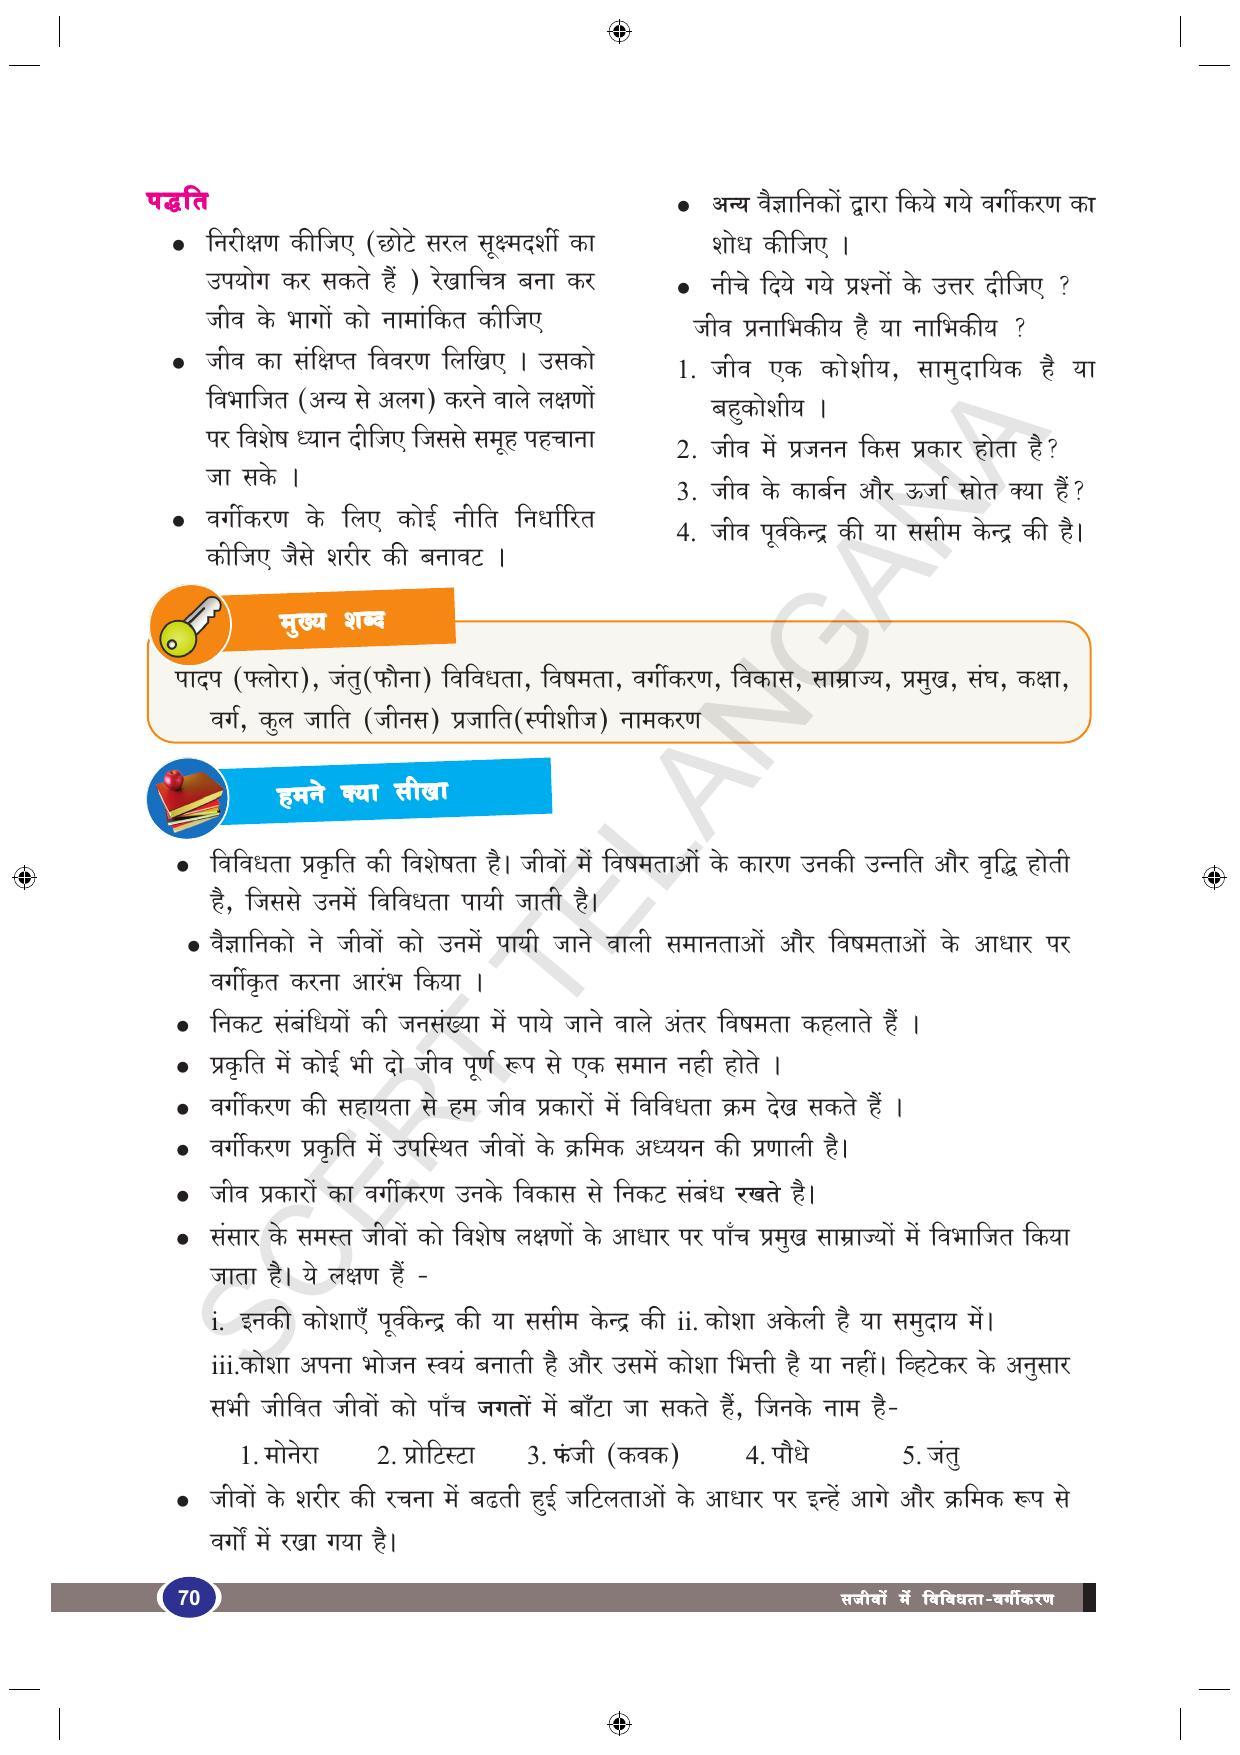 TS SCERT Class 9 Biological Science (Hindi Medium) Text Book - Page 82